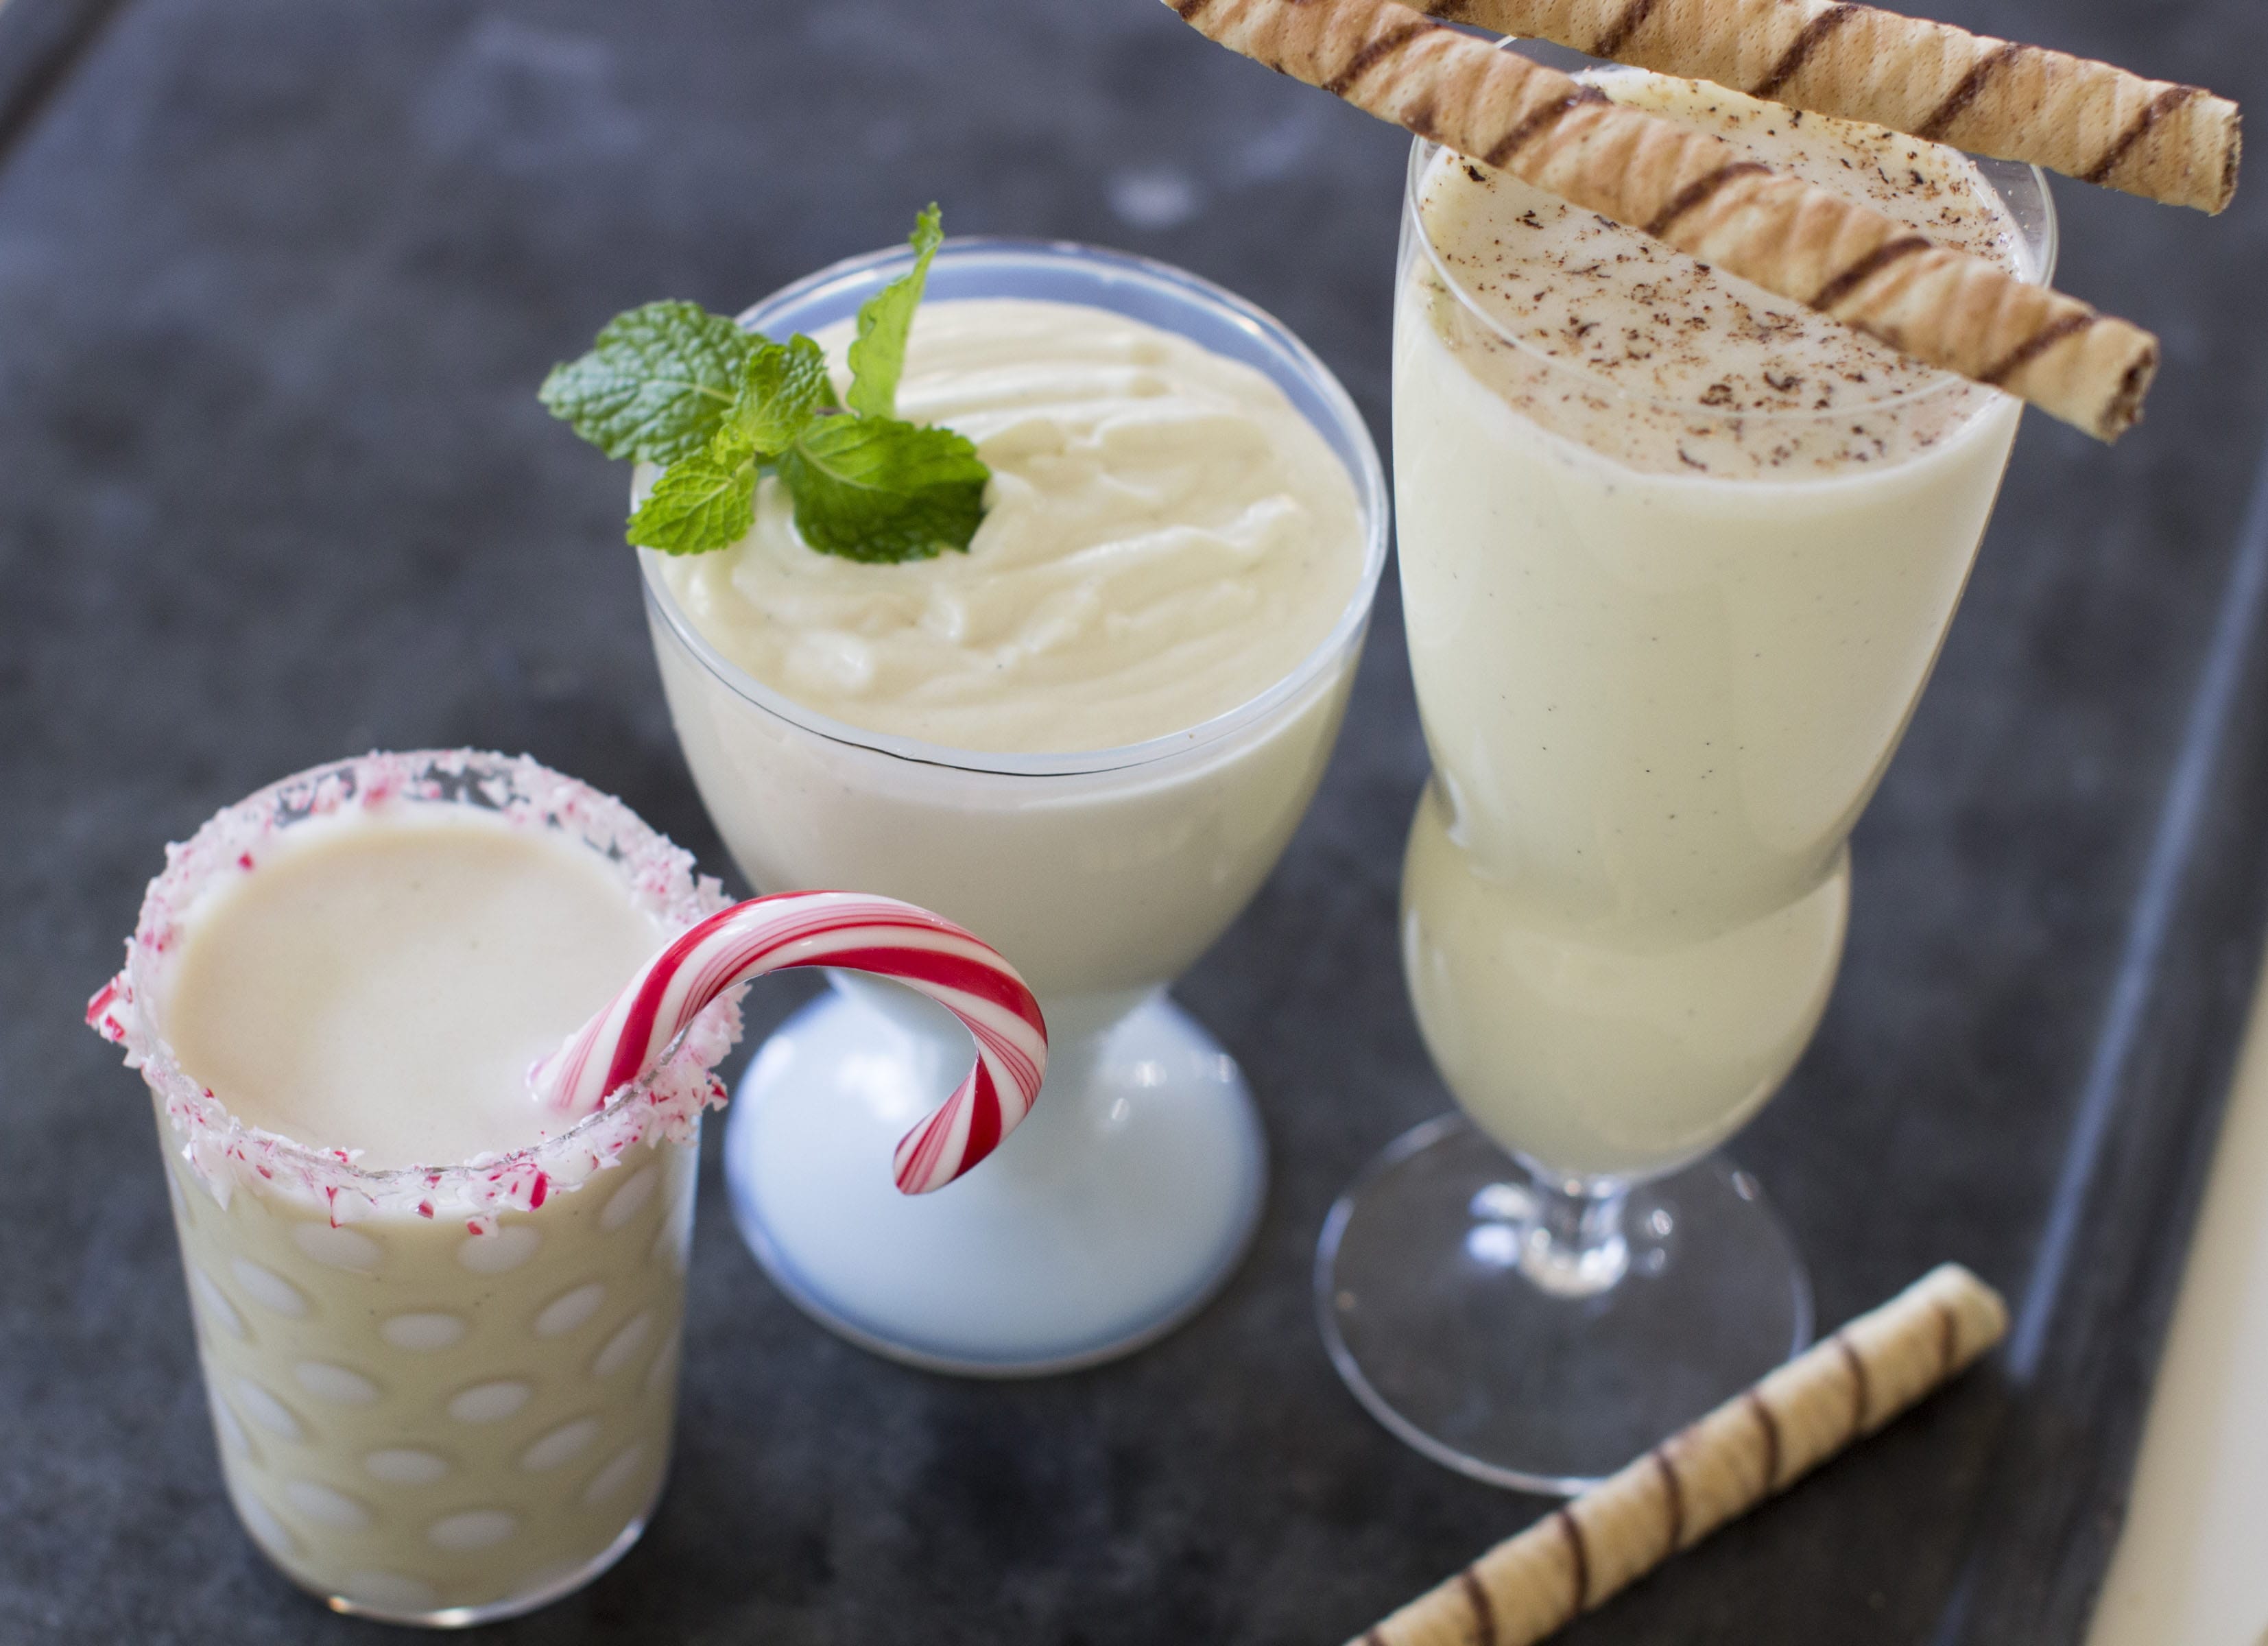 White Chocolate Peppermint Eggnog, from left, Light And Airy Eggnog And Classic Eggnog